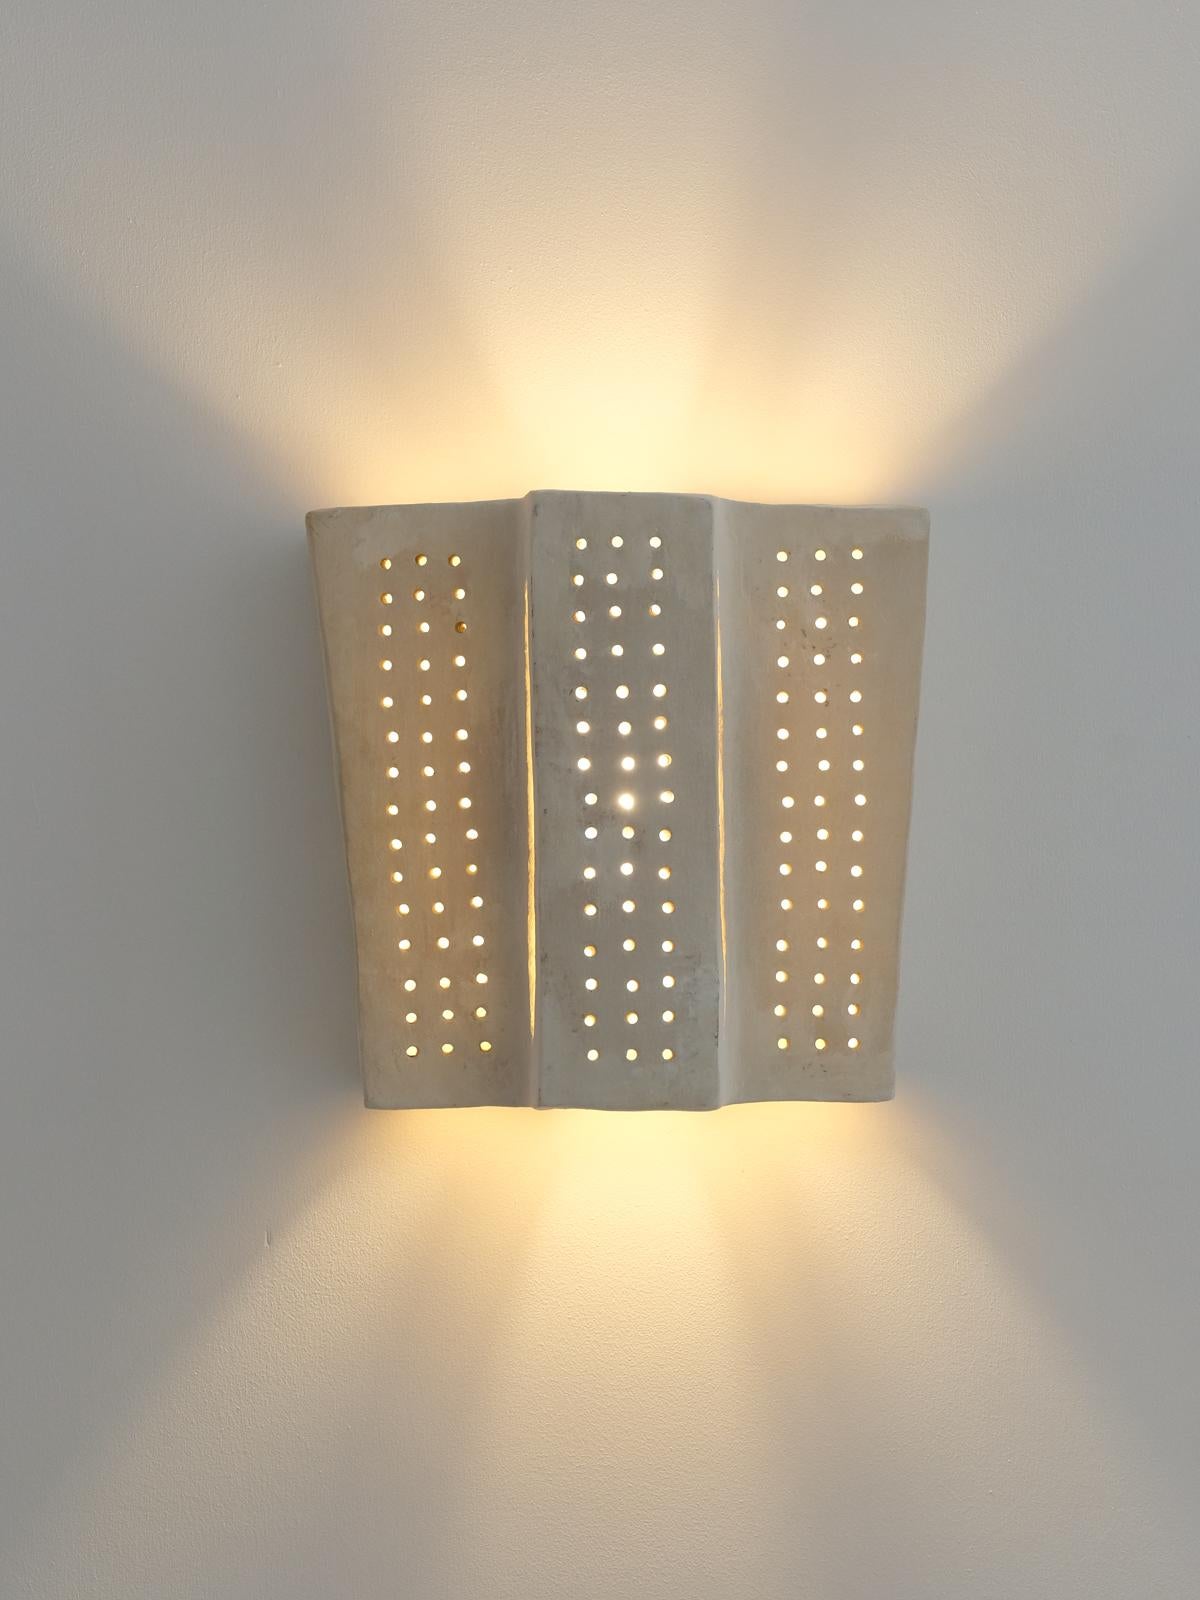 - Handbuilt white ceramic wall light
- made of clay collected from the potter's surroundings.
- made in the Moroccan Rif mountains by the potter Houda.
- co-created by the potter Houda x memòri team
- small scale-production
- an extra fixing is